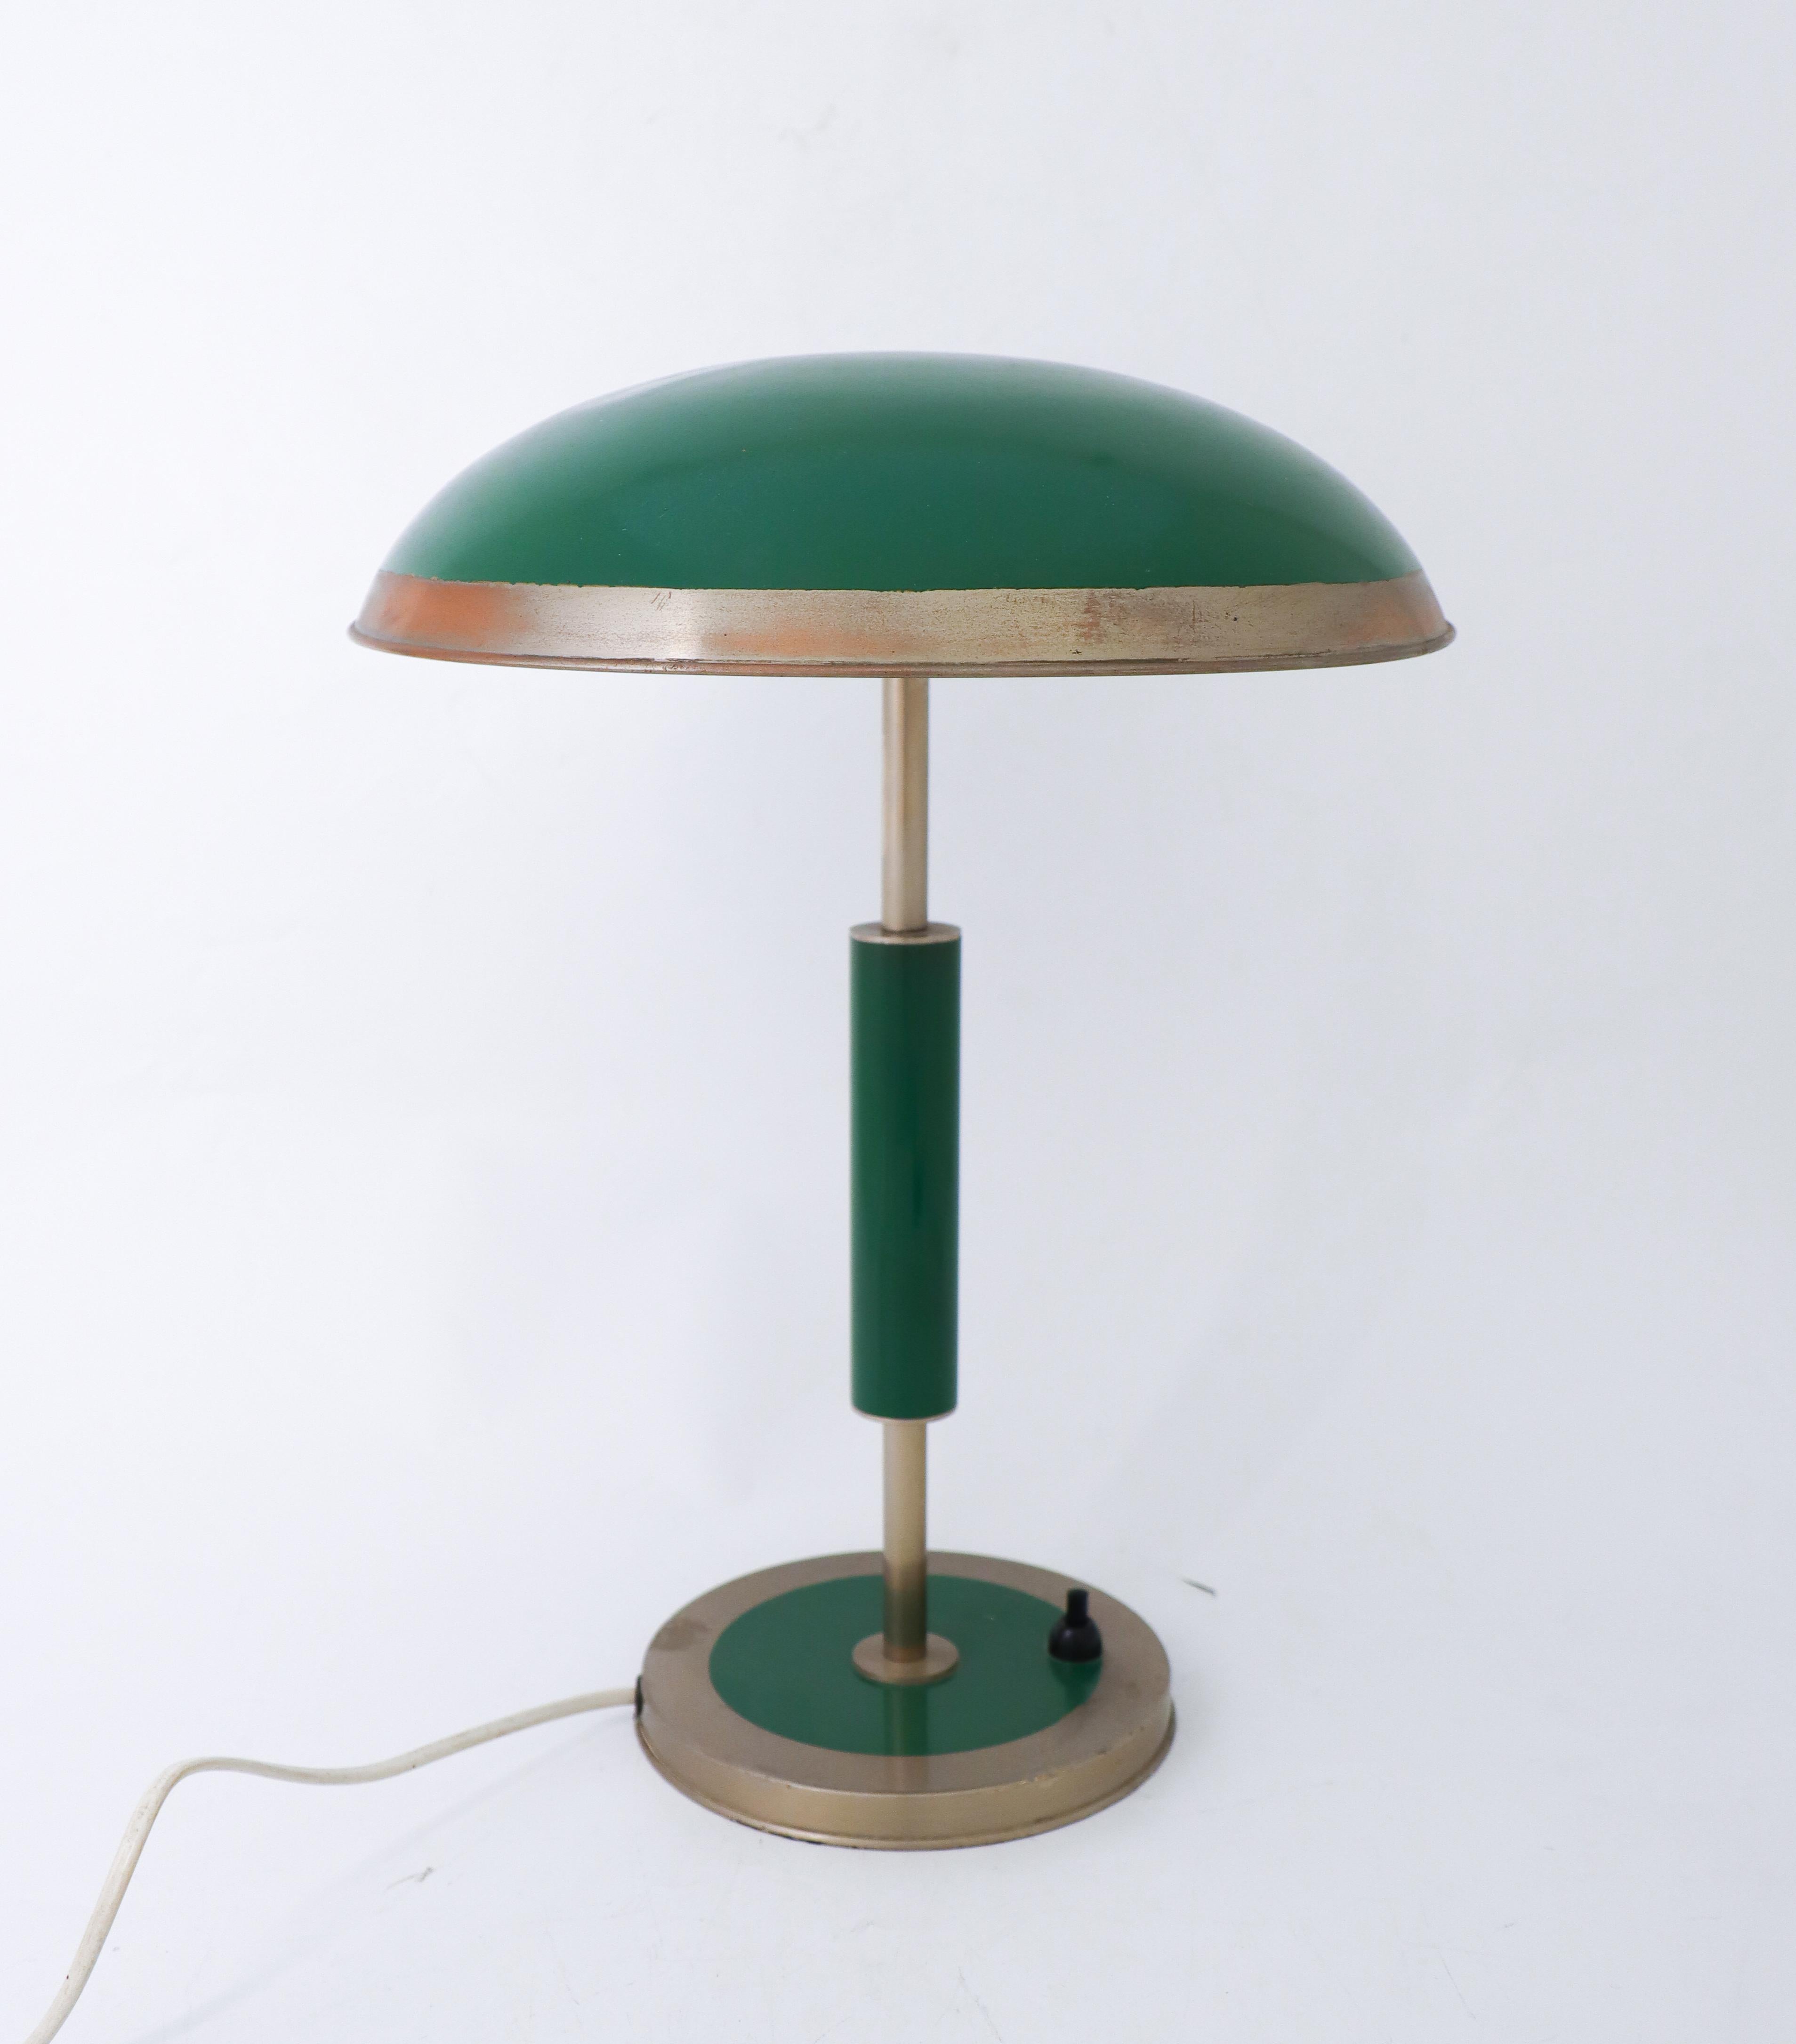 A stunning green Art Deco table lamp from the 1930-1940s. Unfortunately I do not know who the designer is. It is 28.5 cm (11,4